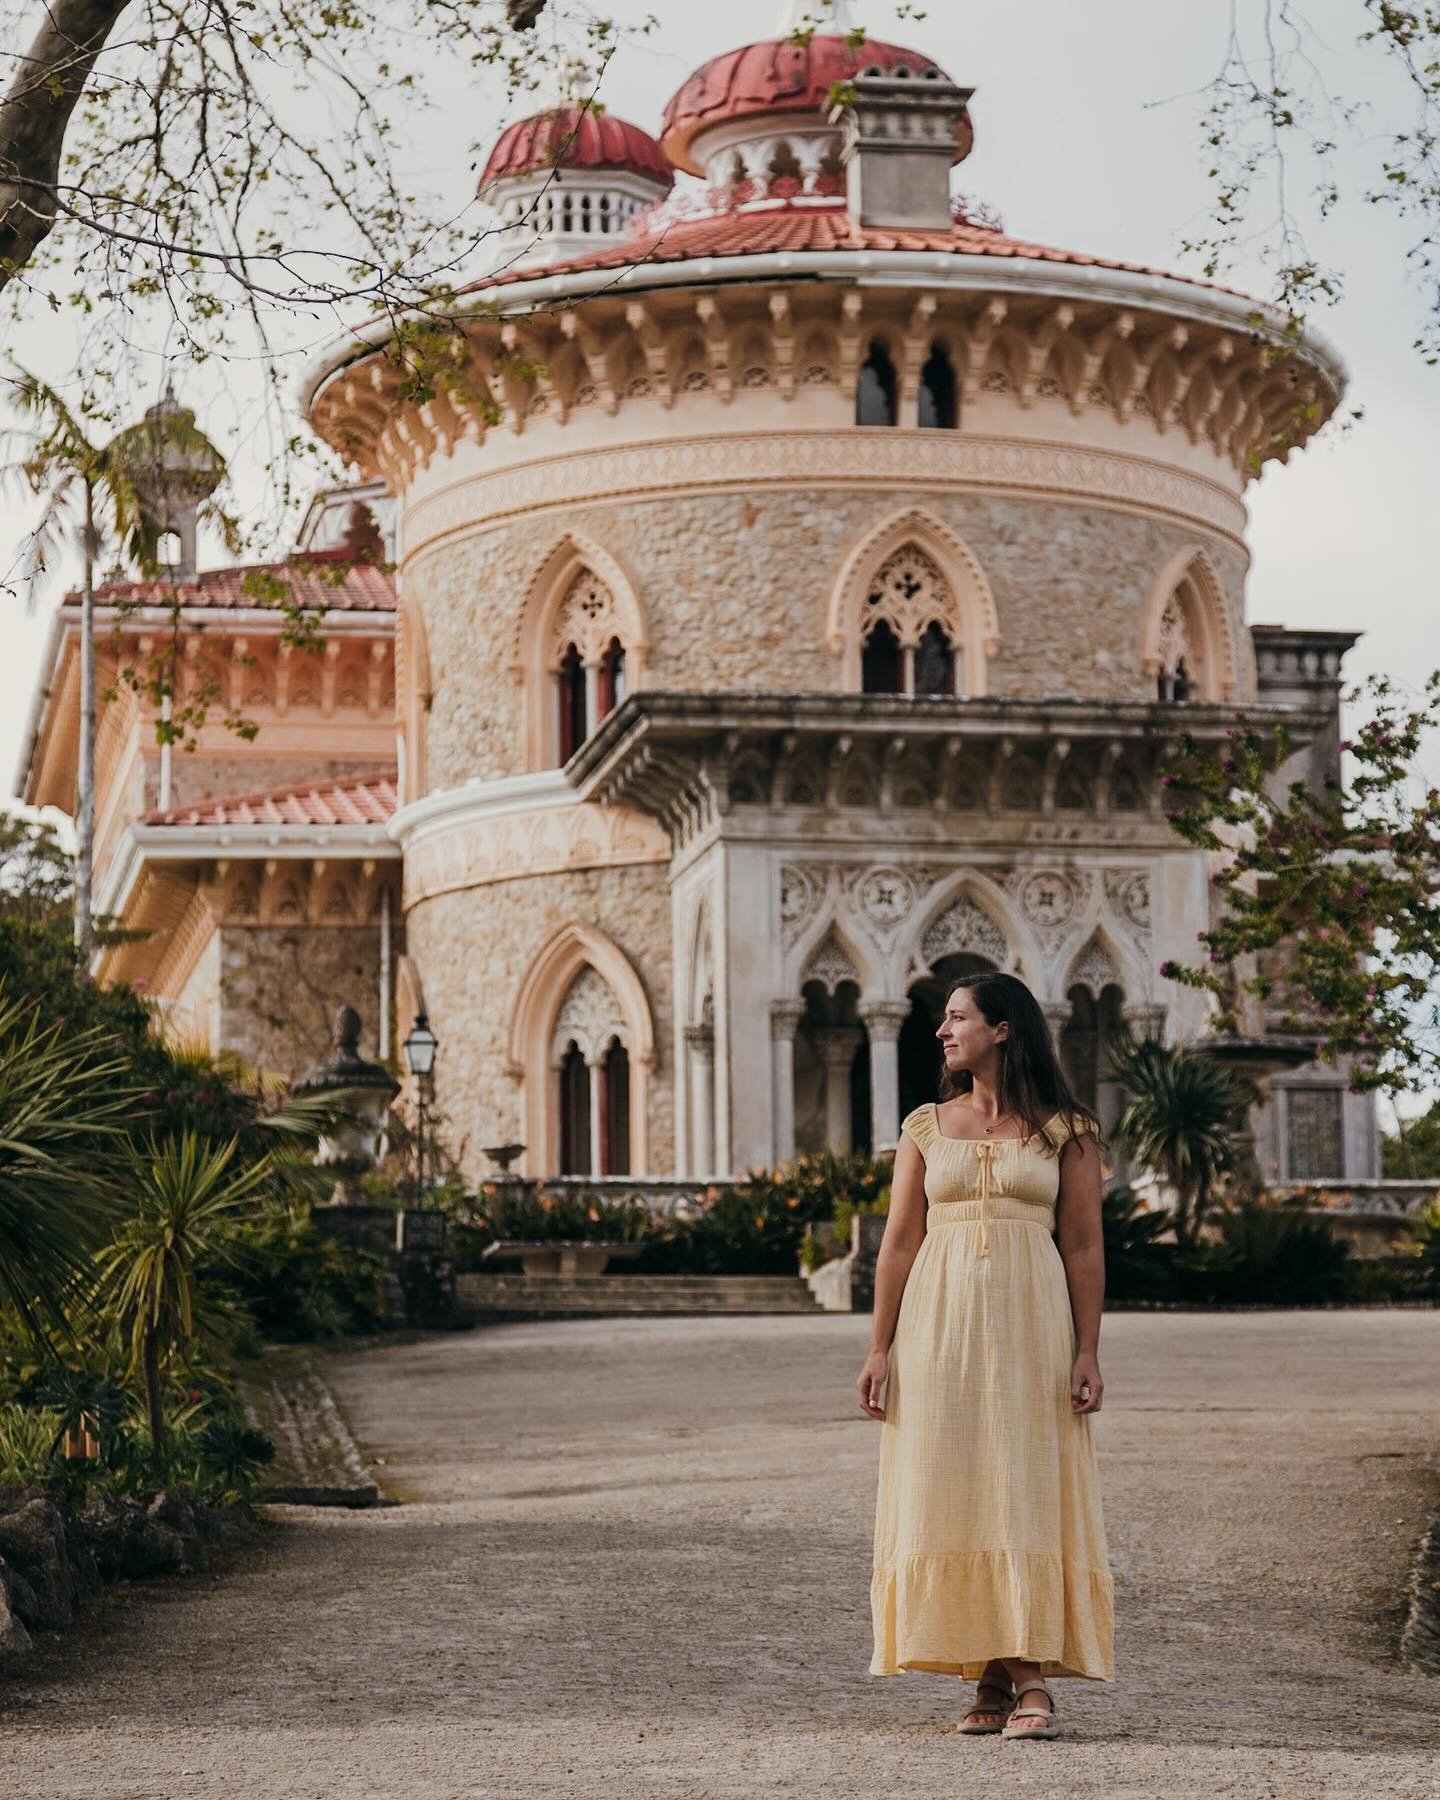 Monserrate Palace nestled in the Sintra mountains is one of our favourite places to visit in Sintra, it has a wonderful peaceful setting, astonishing architecture with Islamic influence, botanical gardens that are a sight to behold. Over time, Monser